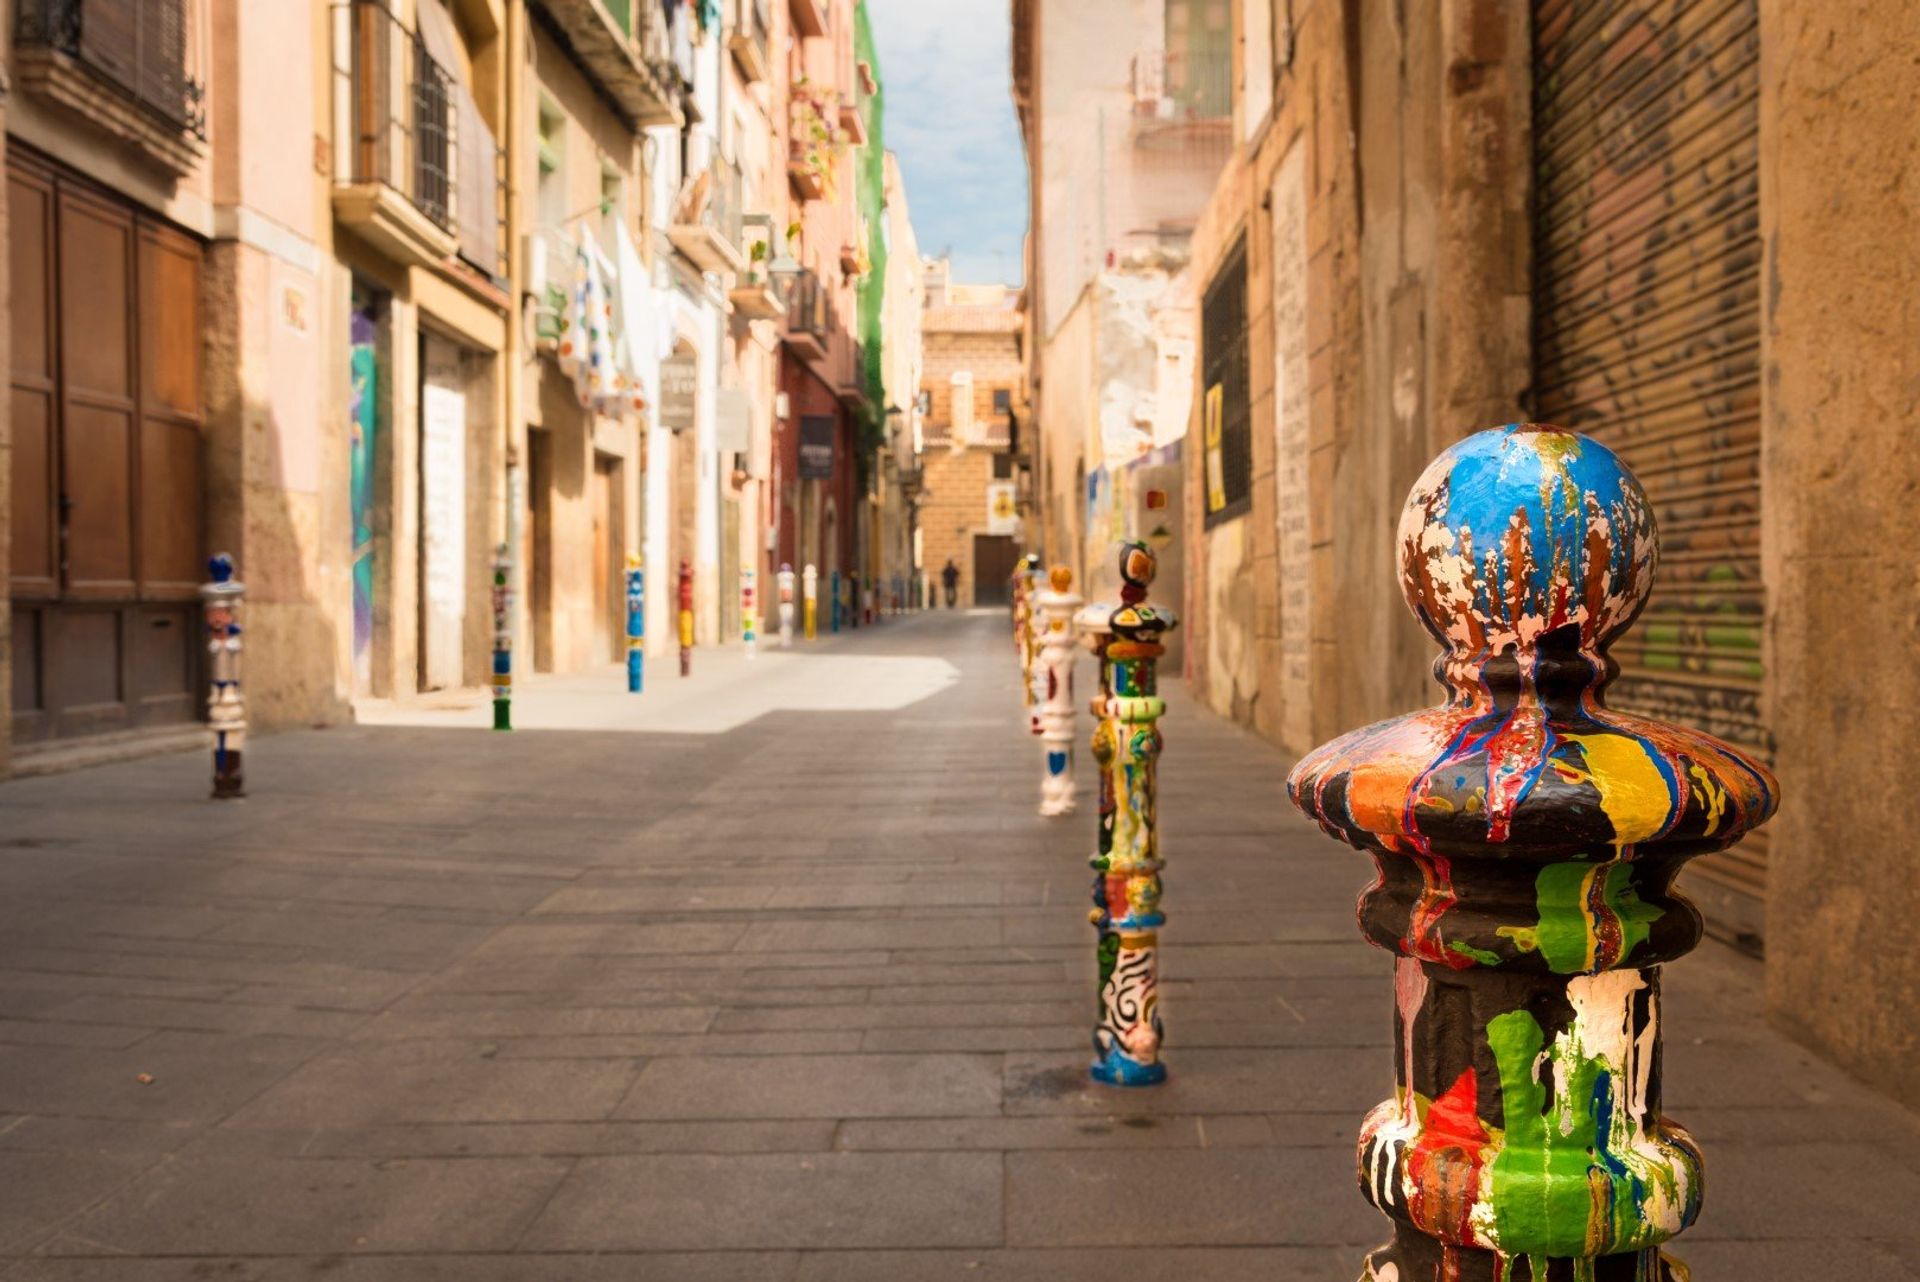 One of Tarragona's colourful old streets